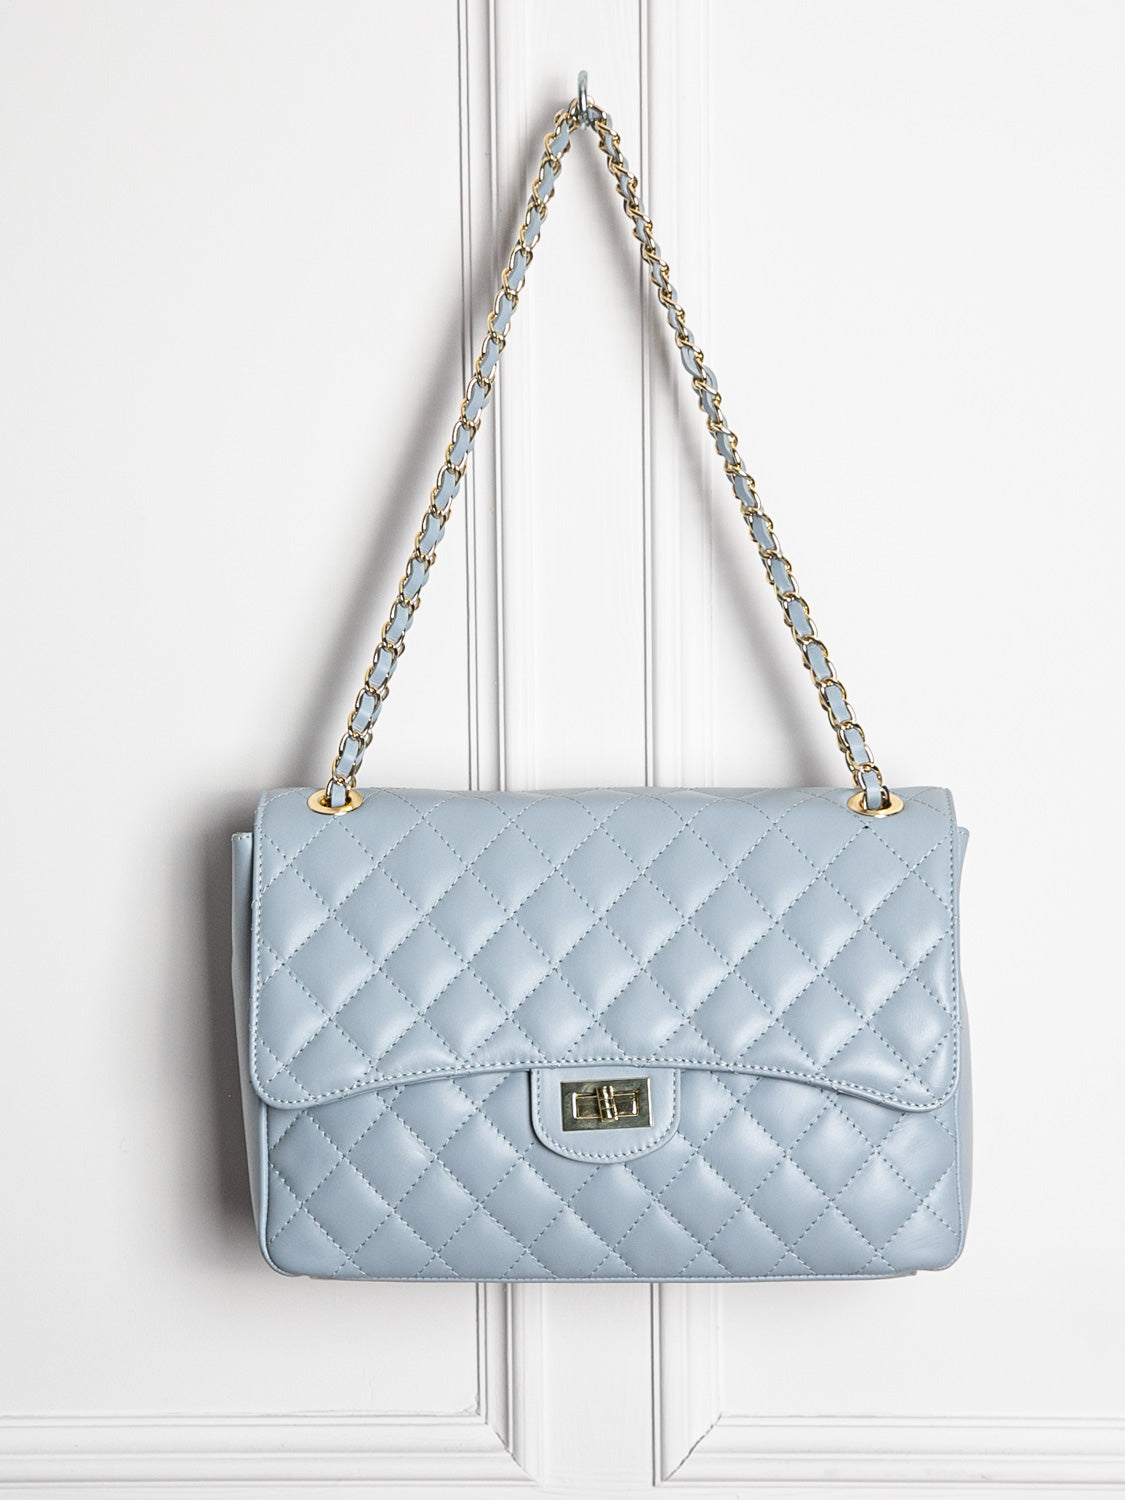 Quilted leather bag with gold details